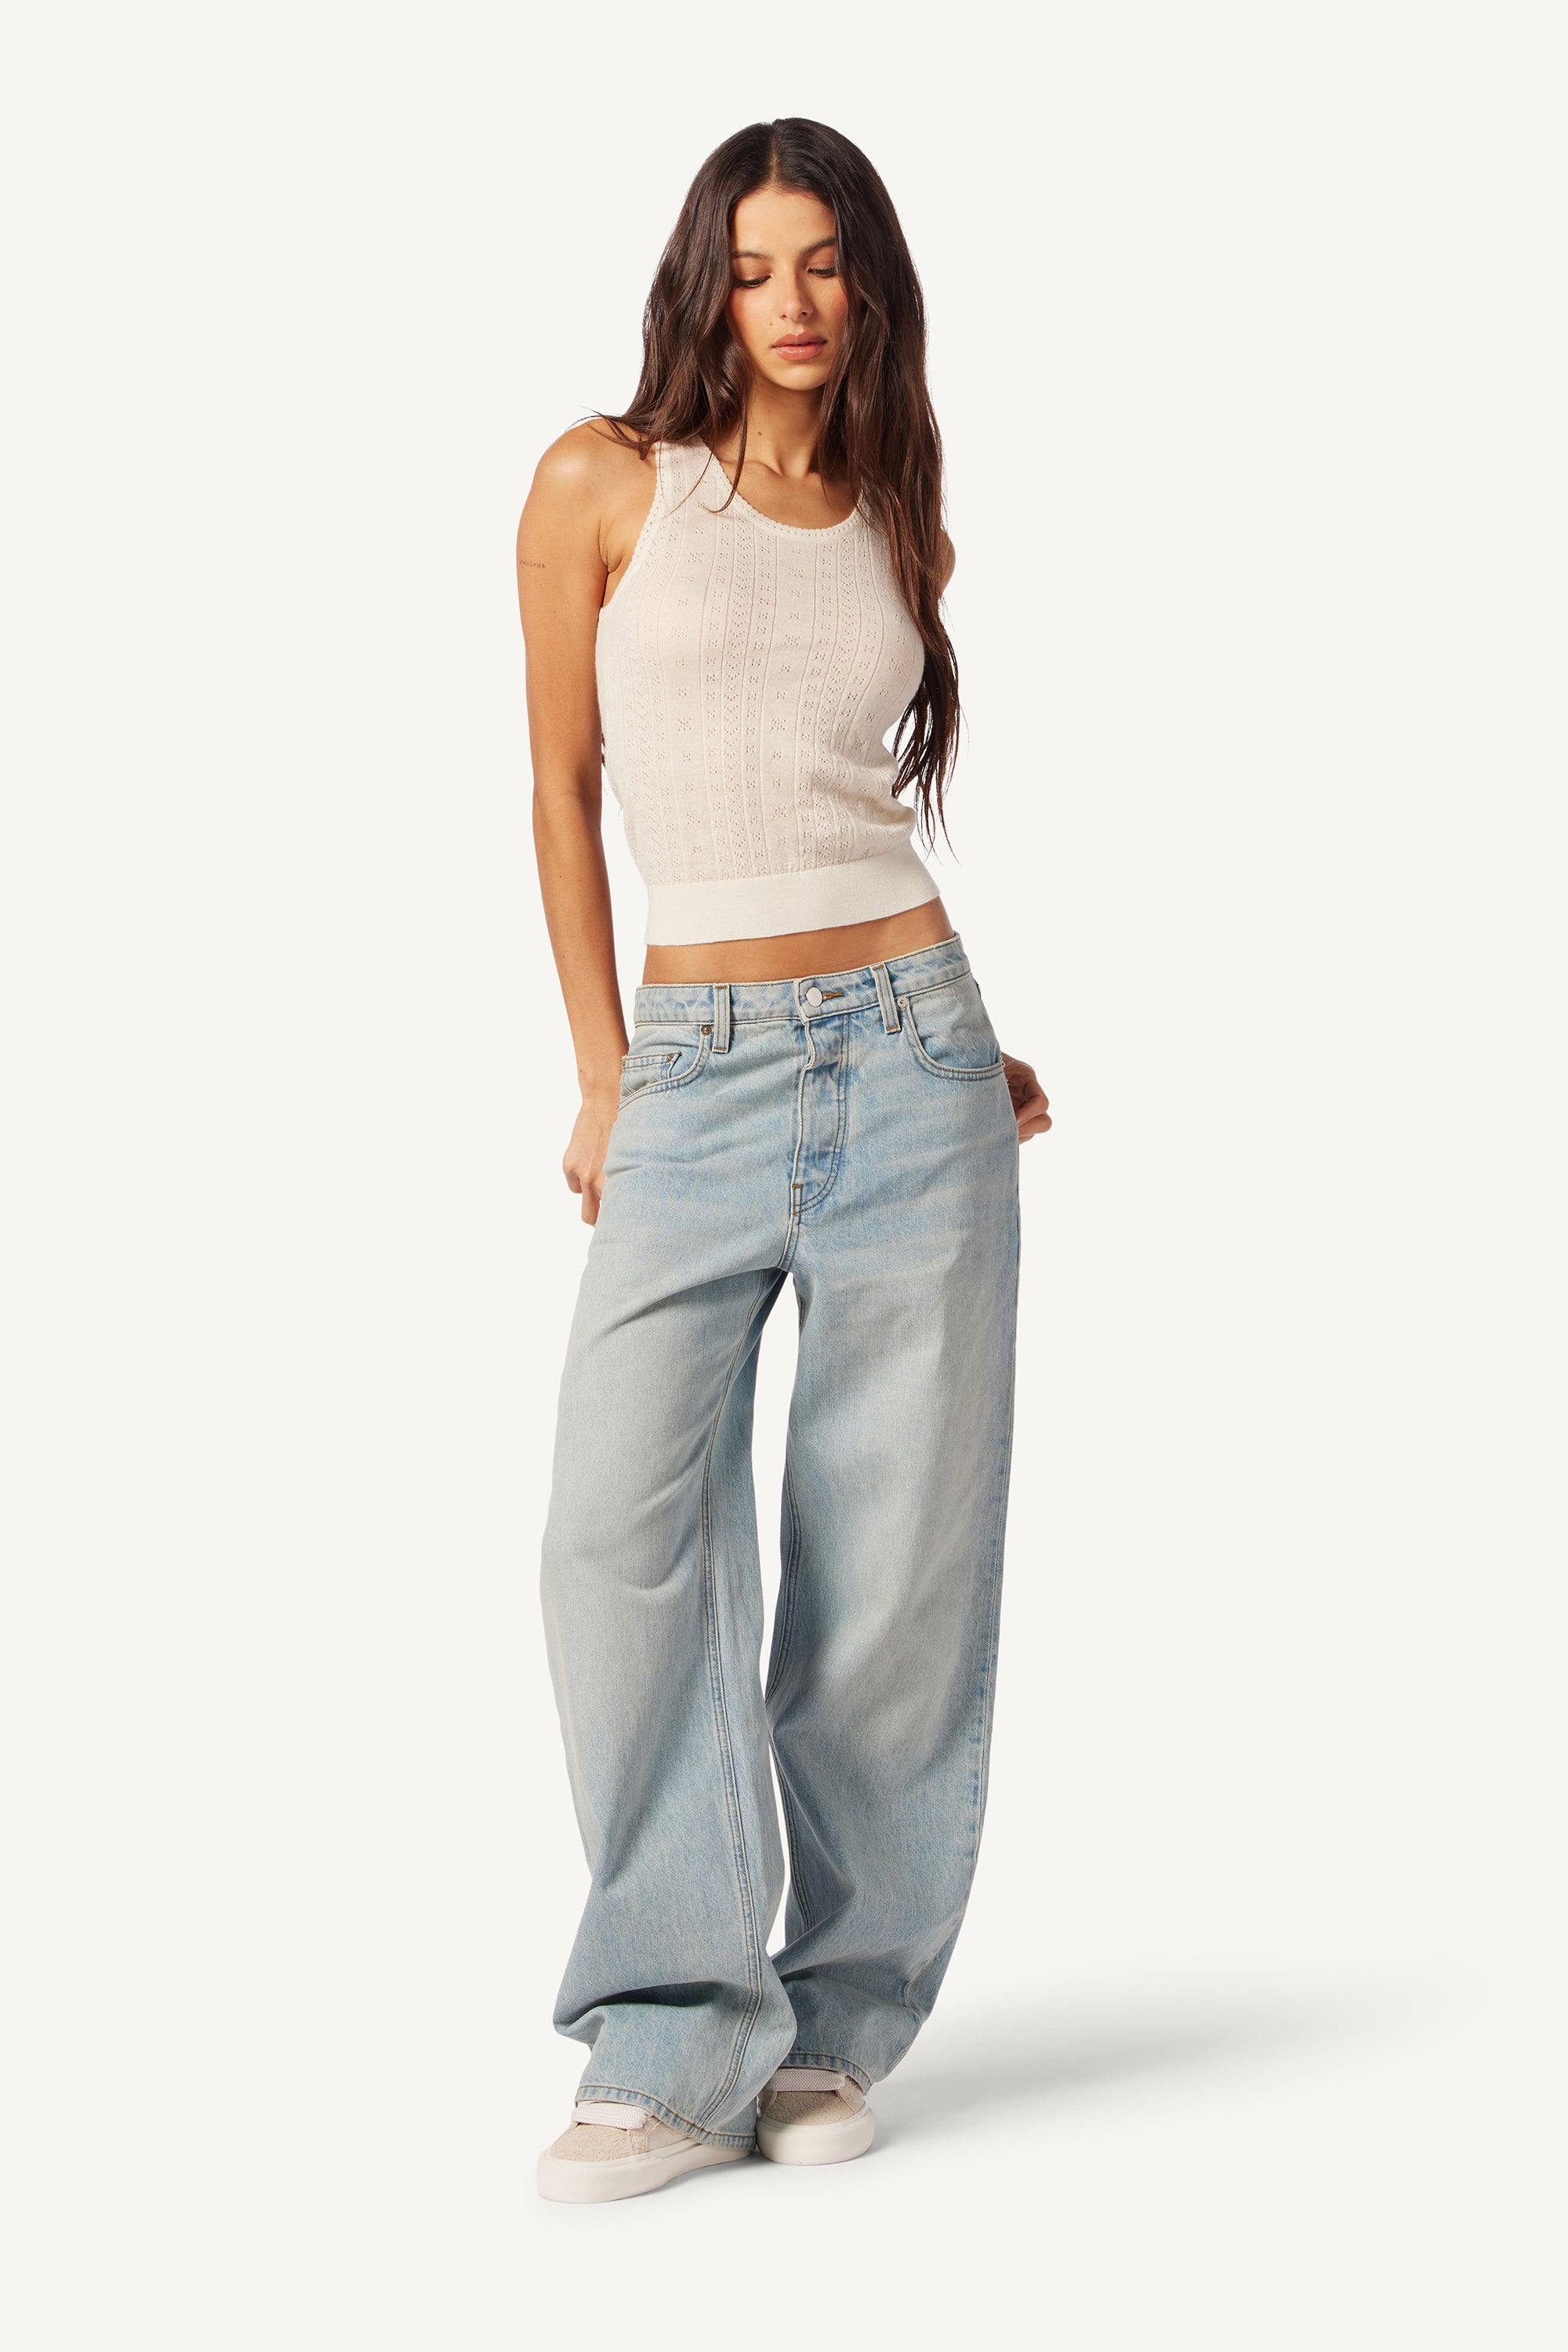 Sammy Jeans from Sablyn's Denim Collection is our #1 selling jeans – SABLYN